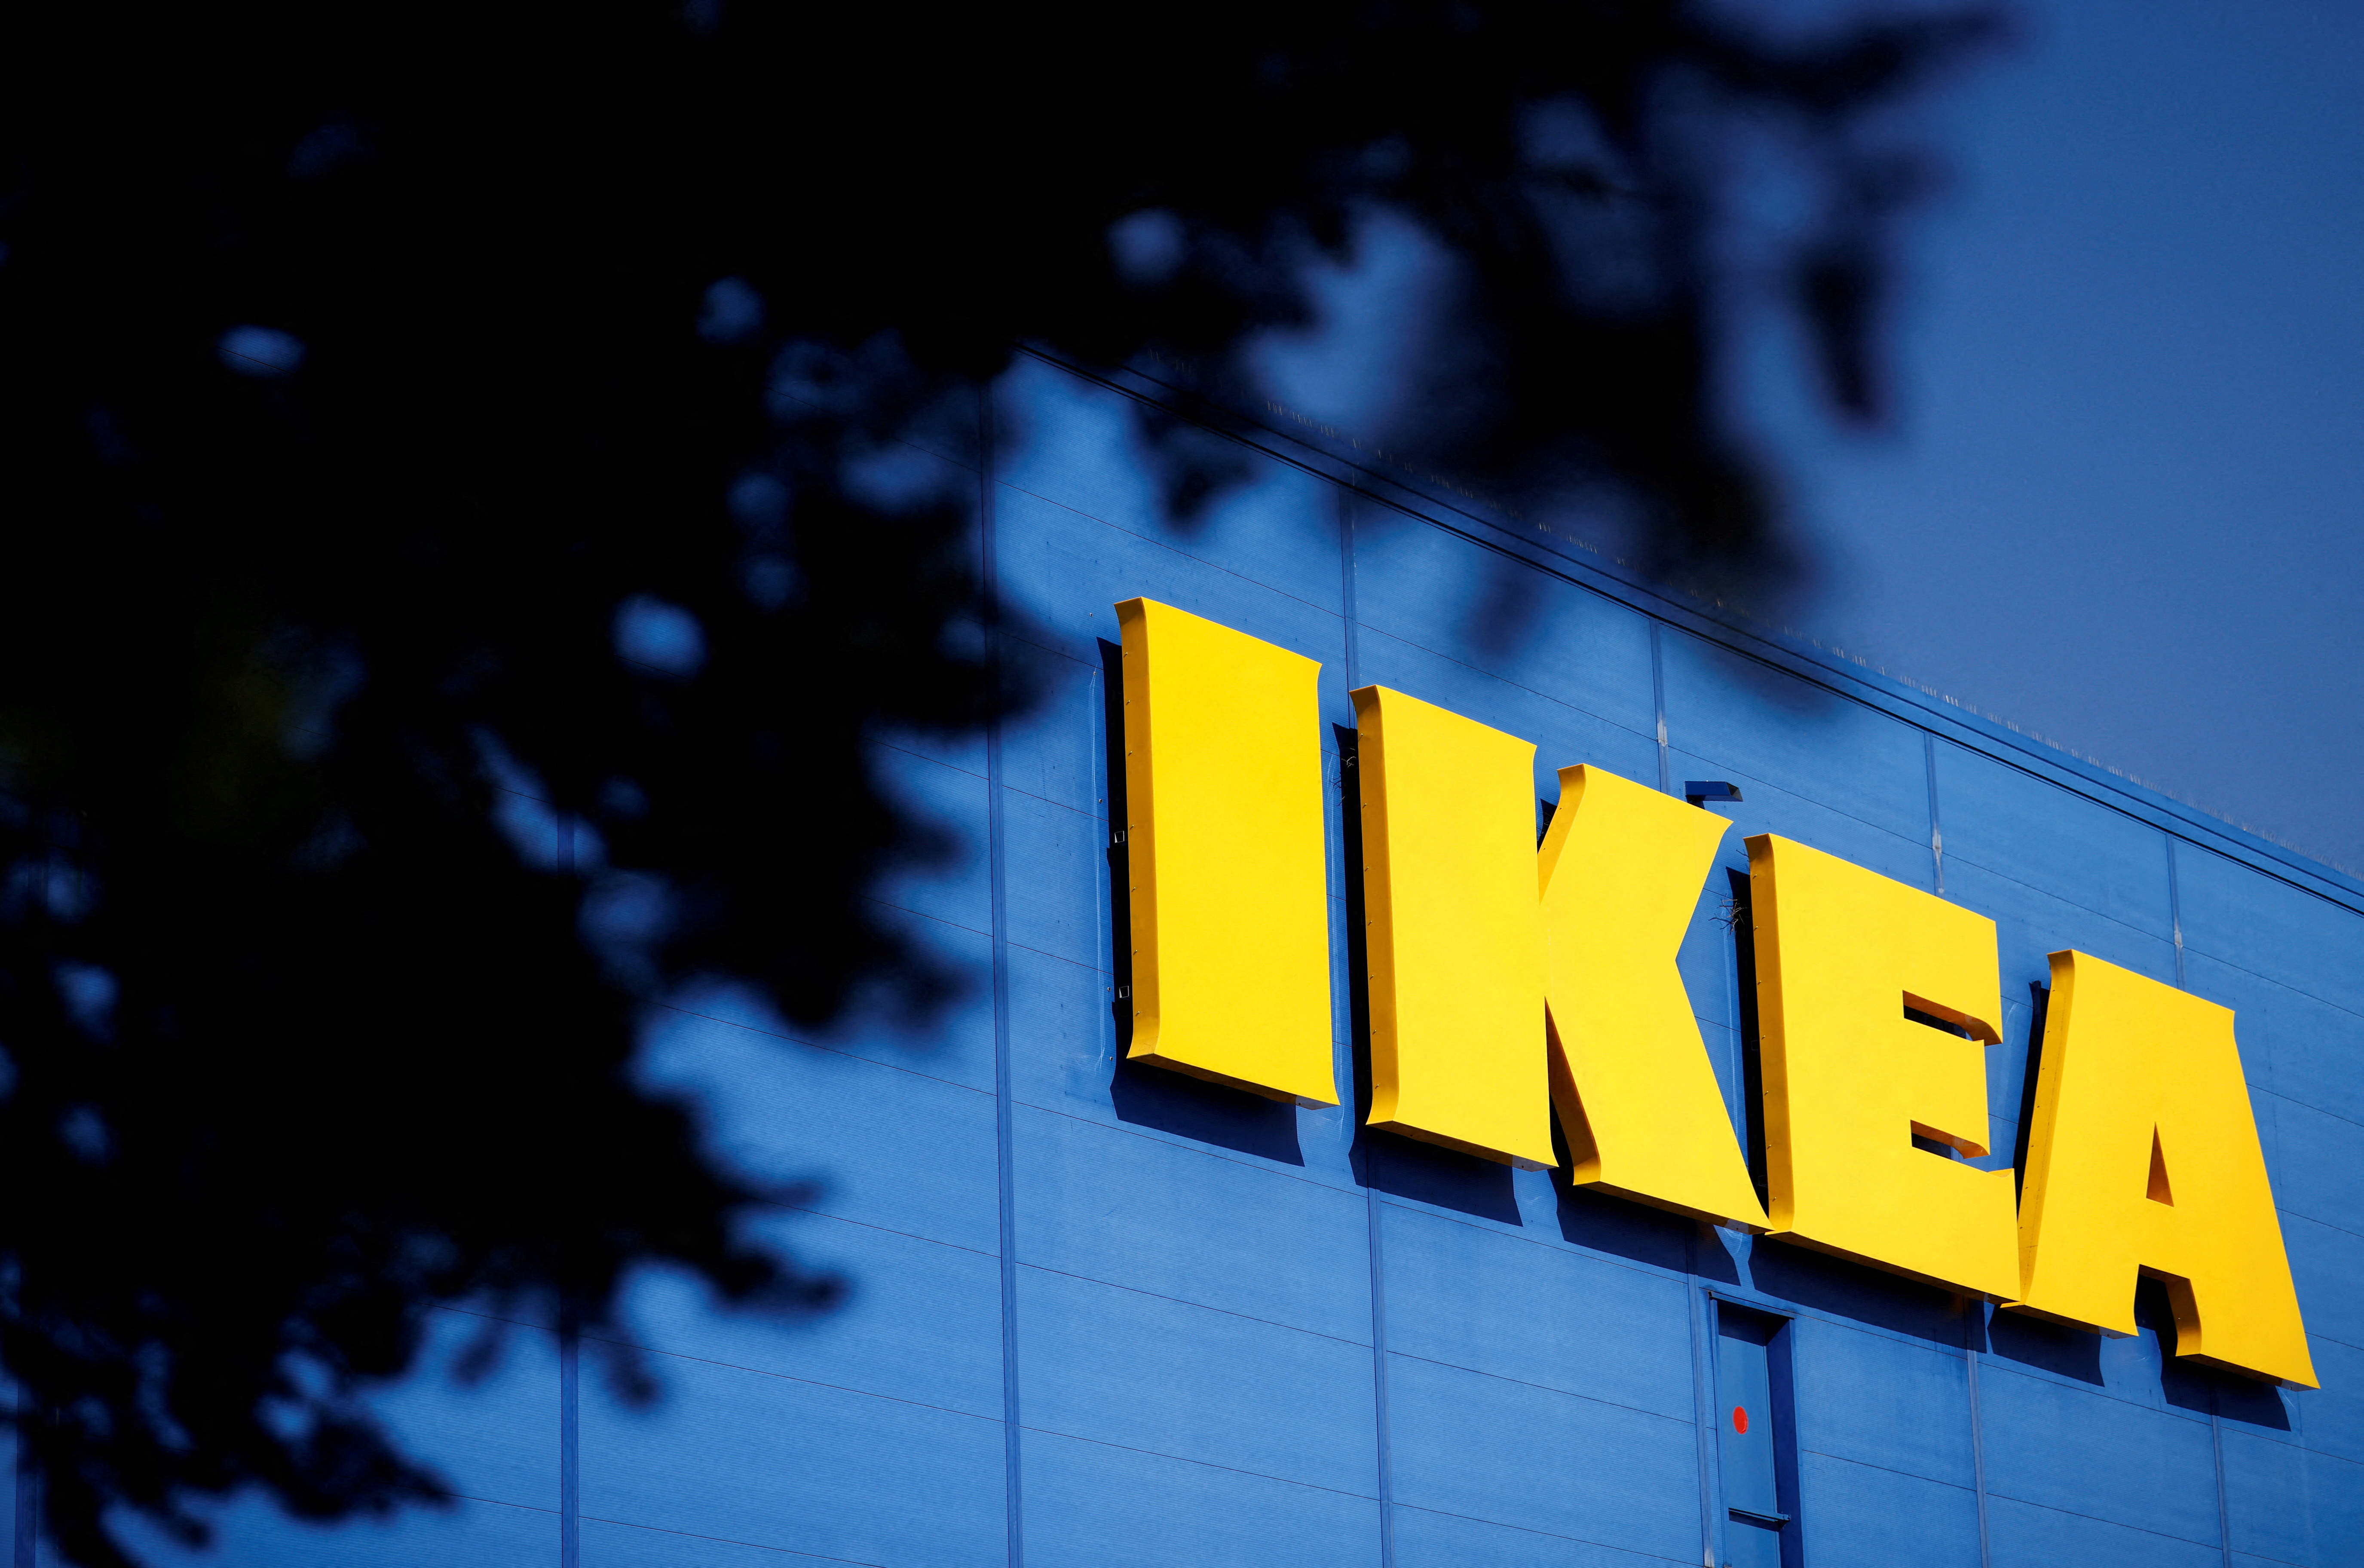 The company's logo is seen outside of an IKEA Group store in Saint-Herblain near Nantes, France, March 22, 2021. REUTERS/Stephane Mahe/File Photo